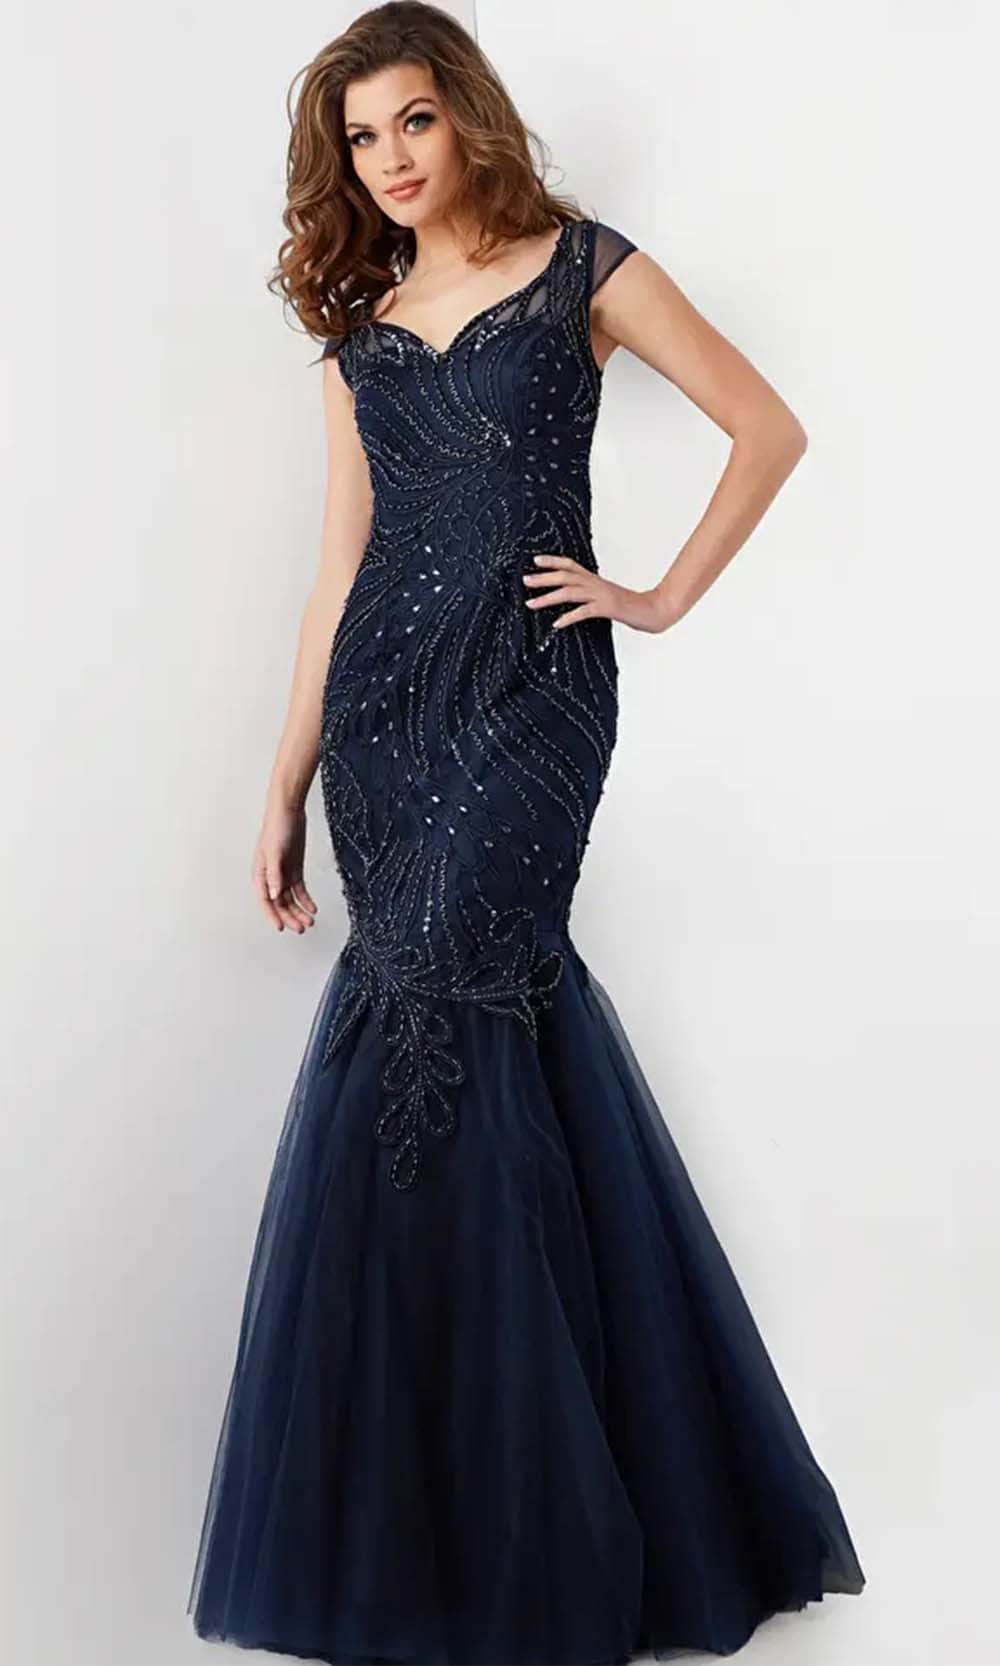 Image of Jovani 25850 - Embellished Cap Sleeve Prom Gown